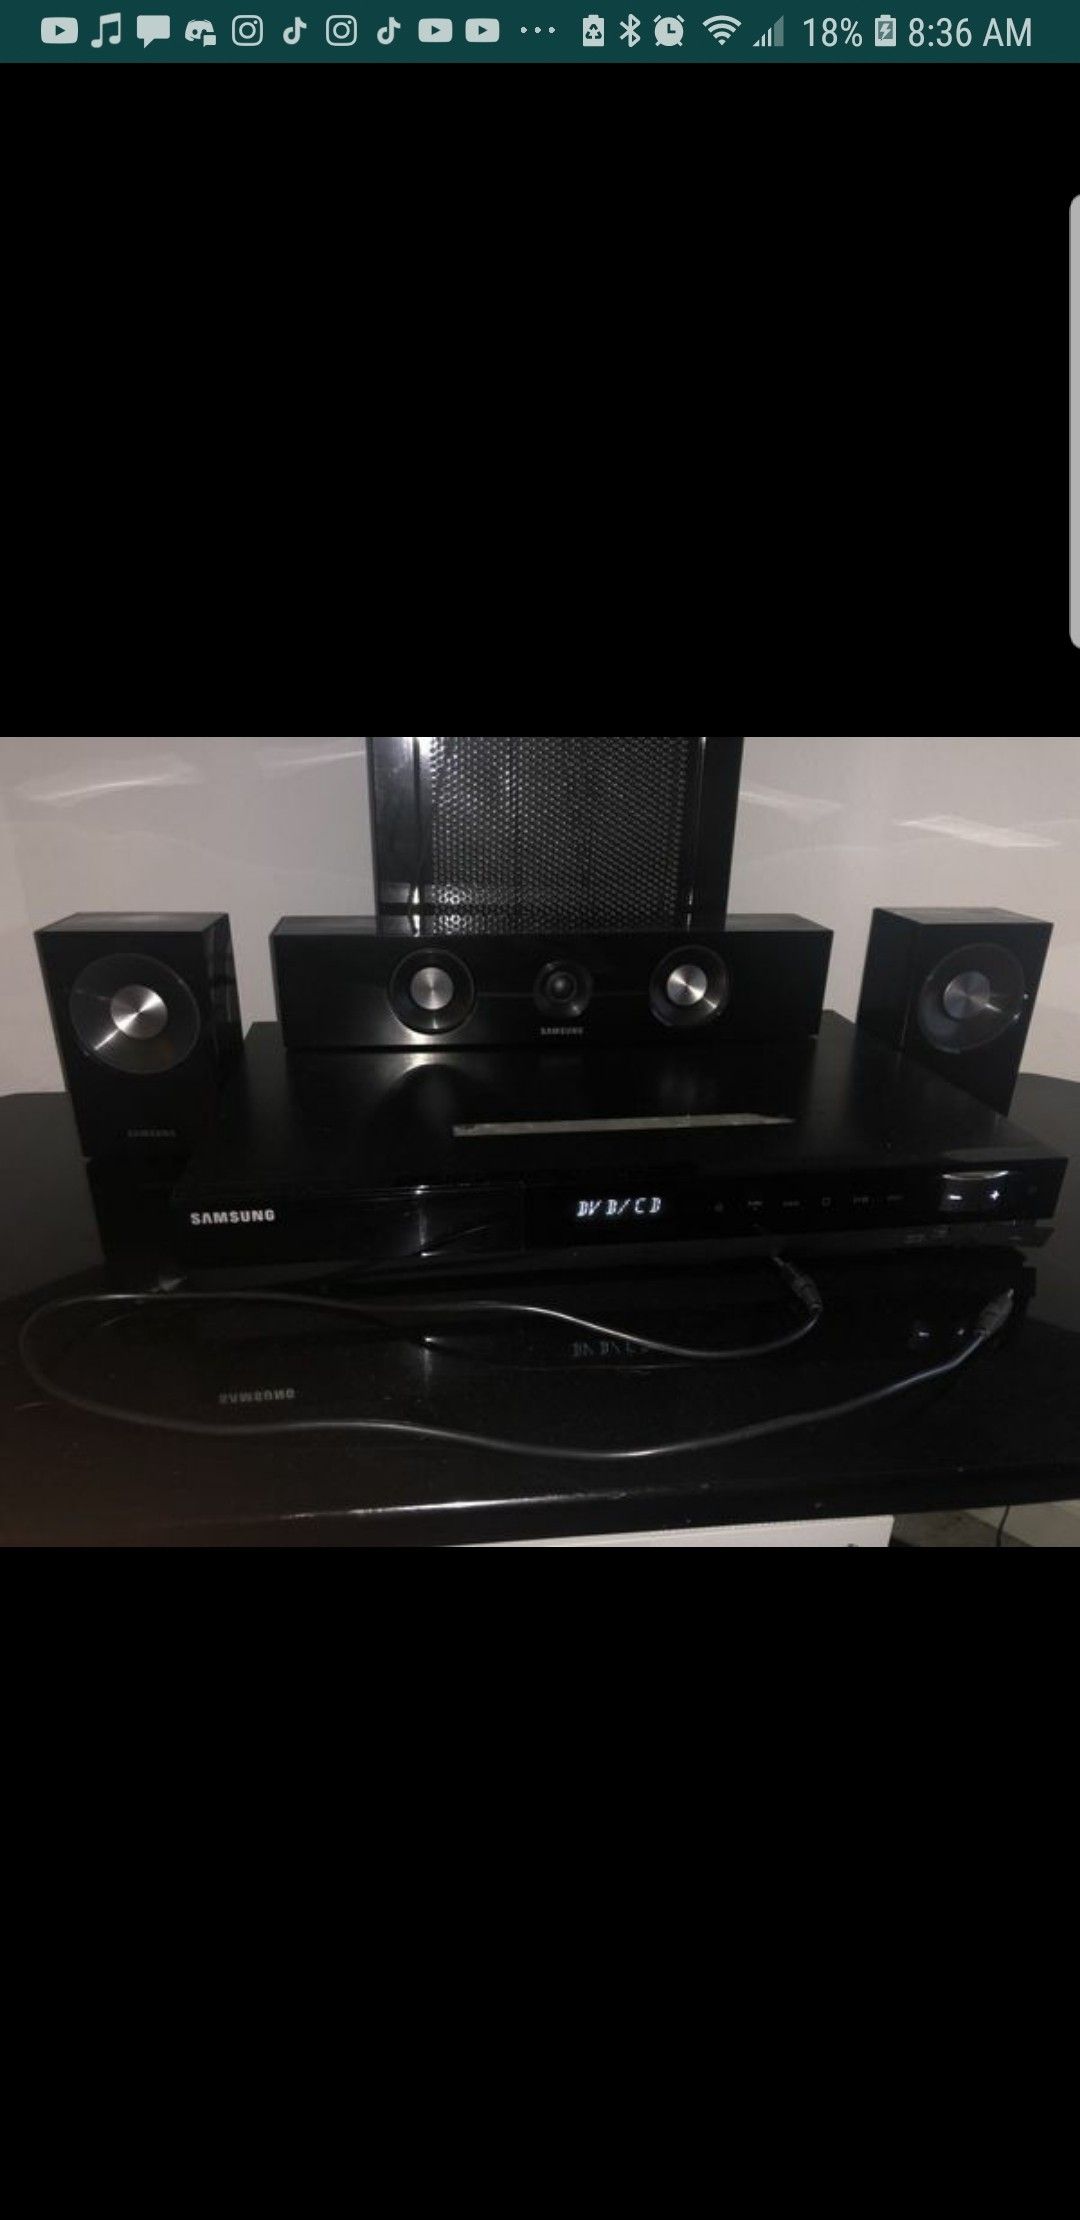 Samsung 5 Speaker Home Theater System W/ subwoofer